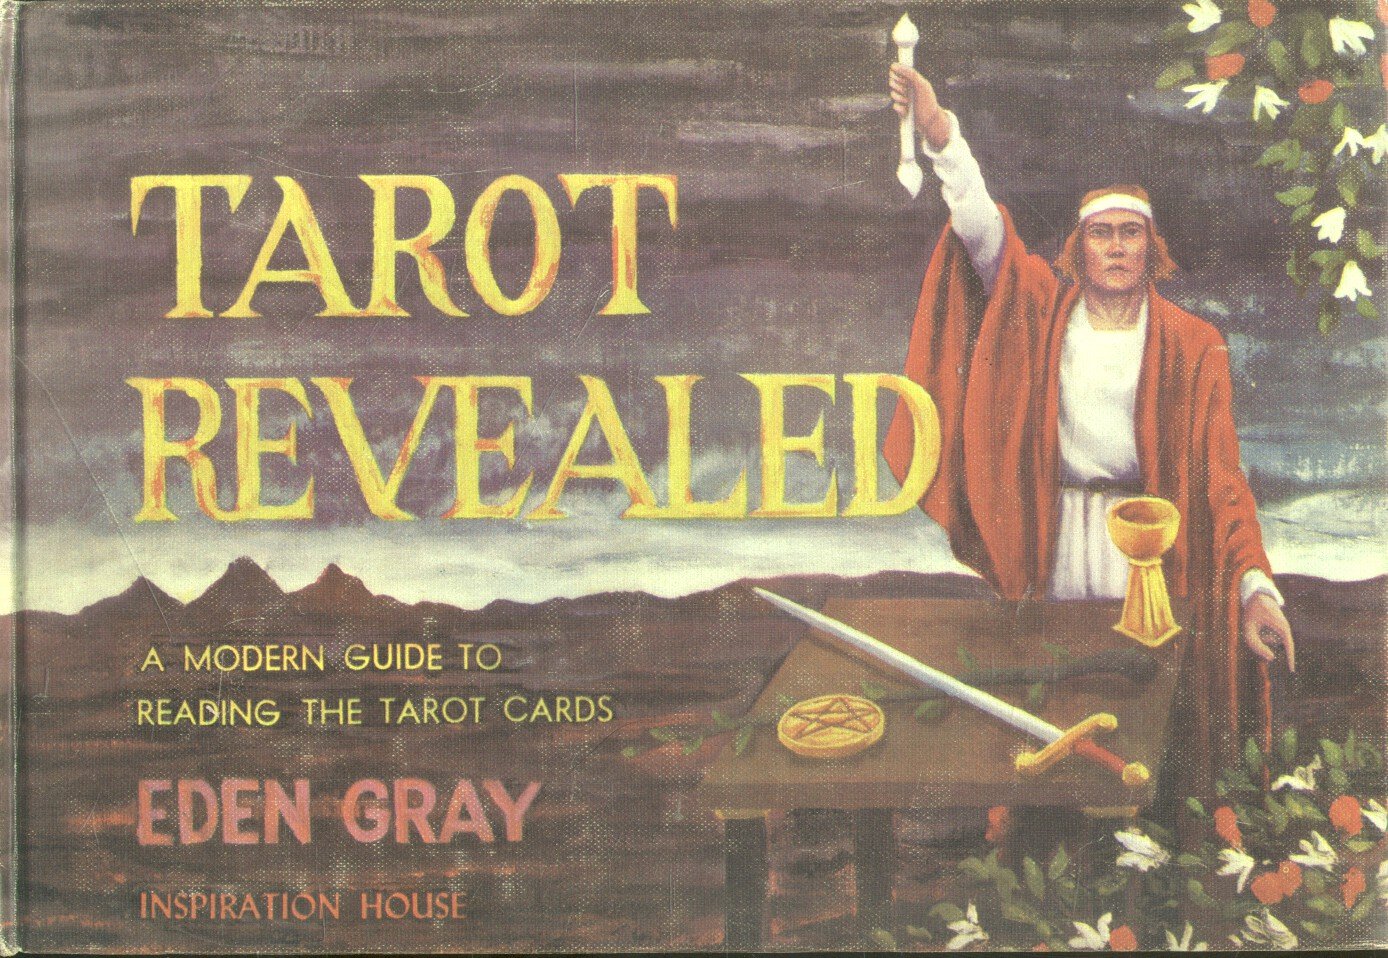 Gray, Eden - Tarot revealed (A modern guide to reading the tarot cards)